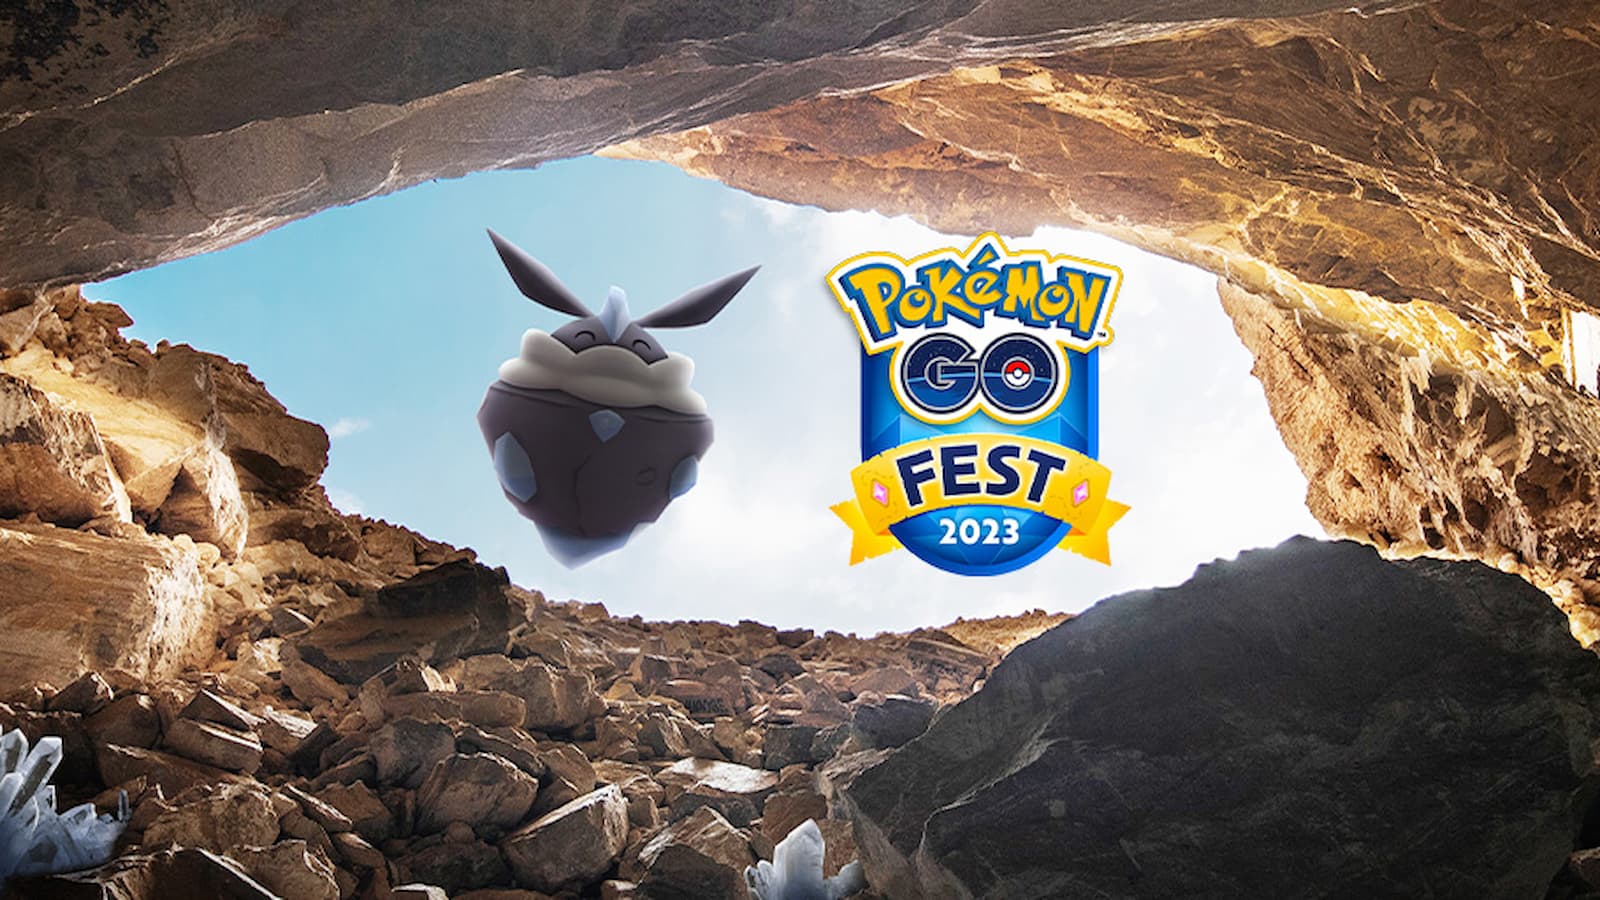 Pokémon GO Fest 2023: Global Fascinating Facets Special Research